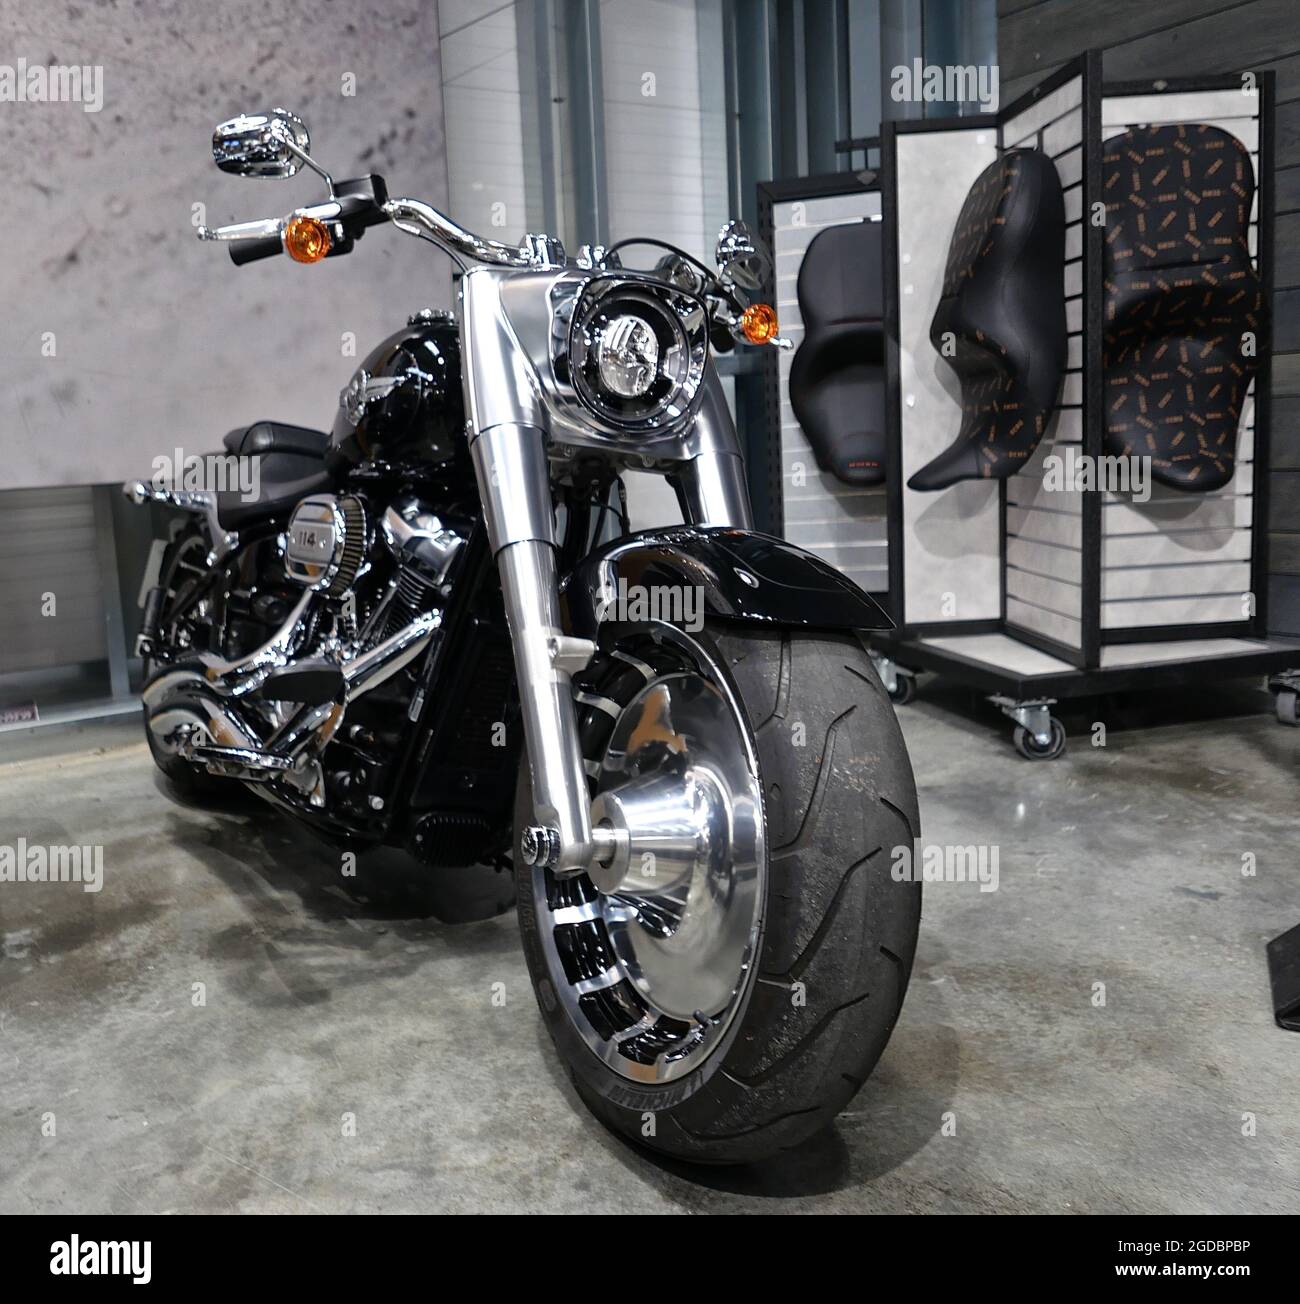 Harley Street Bob High Resolution Stock Photography And Images Alamy